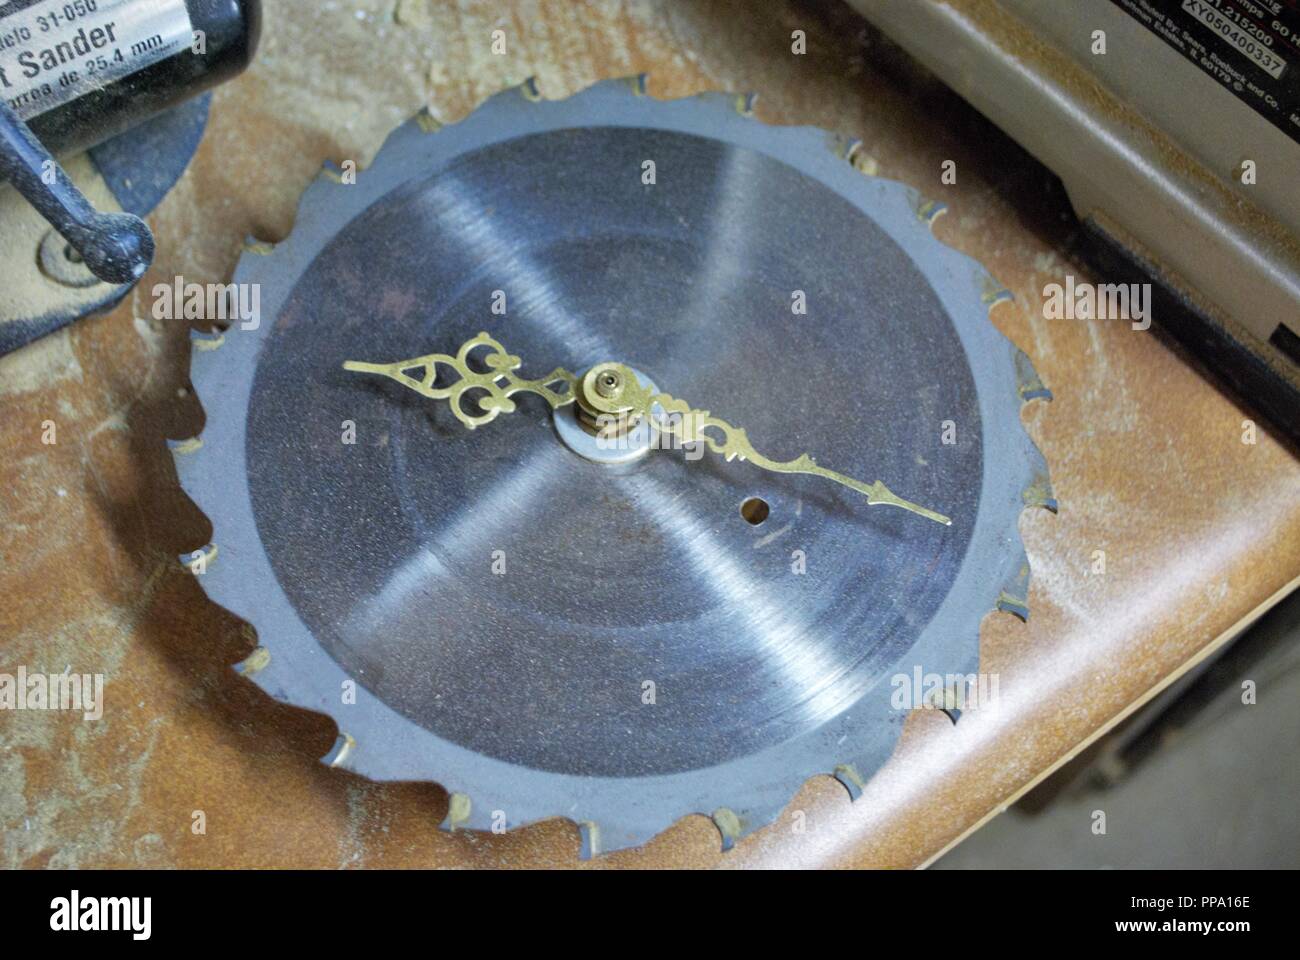 black and white saw blade clock on a work bench Stock Photo